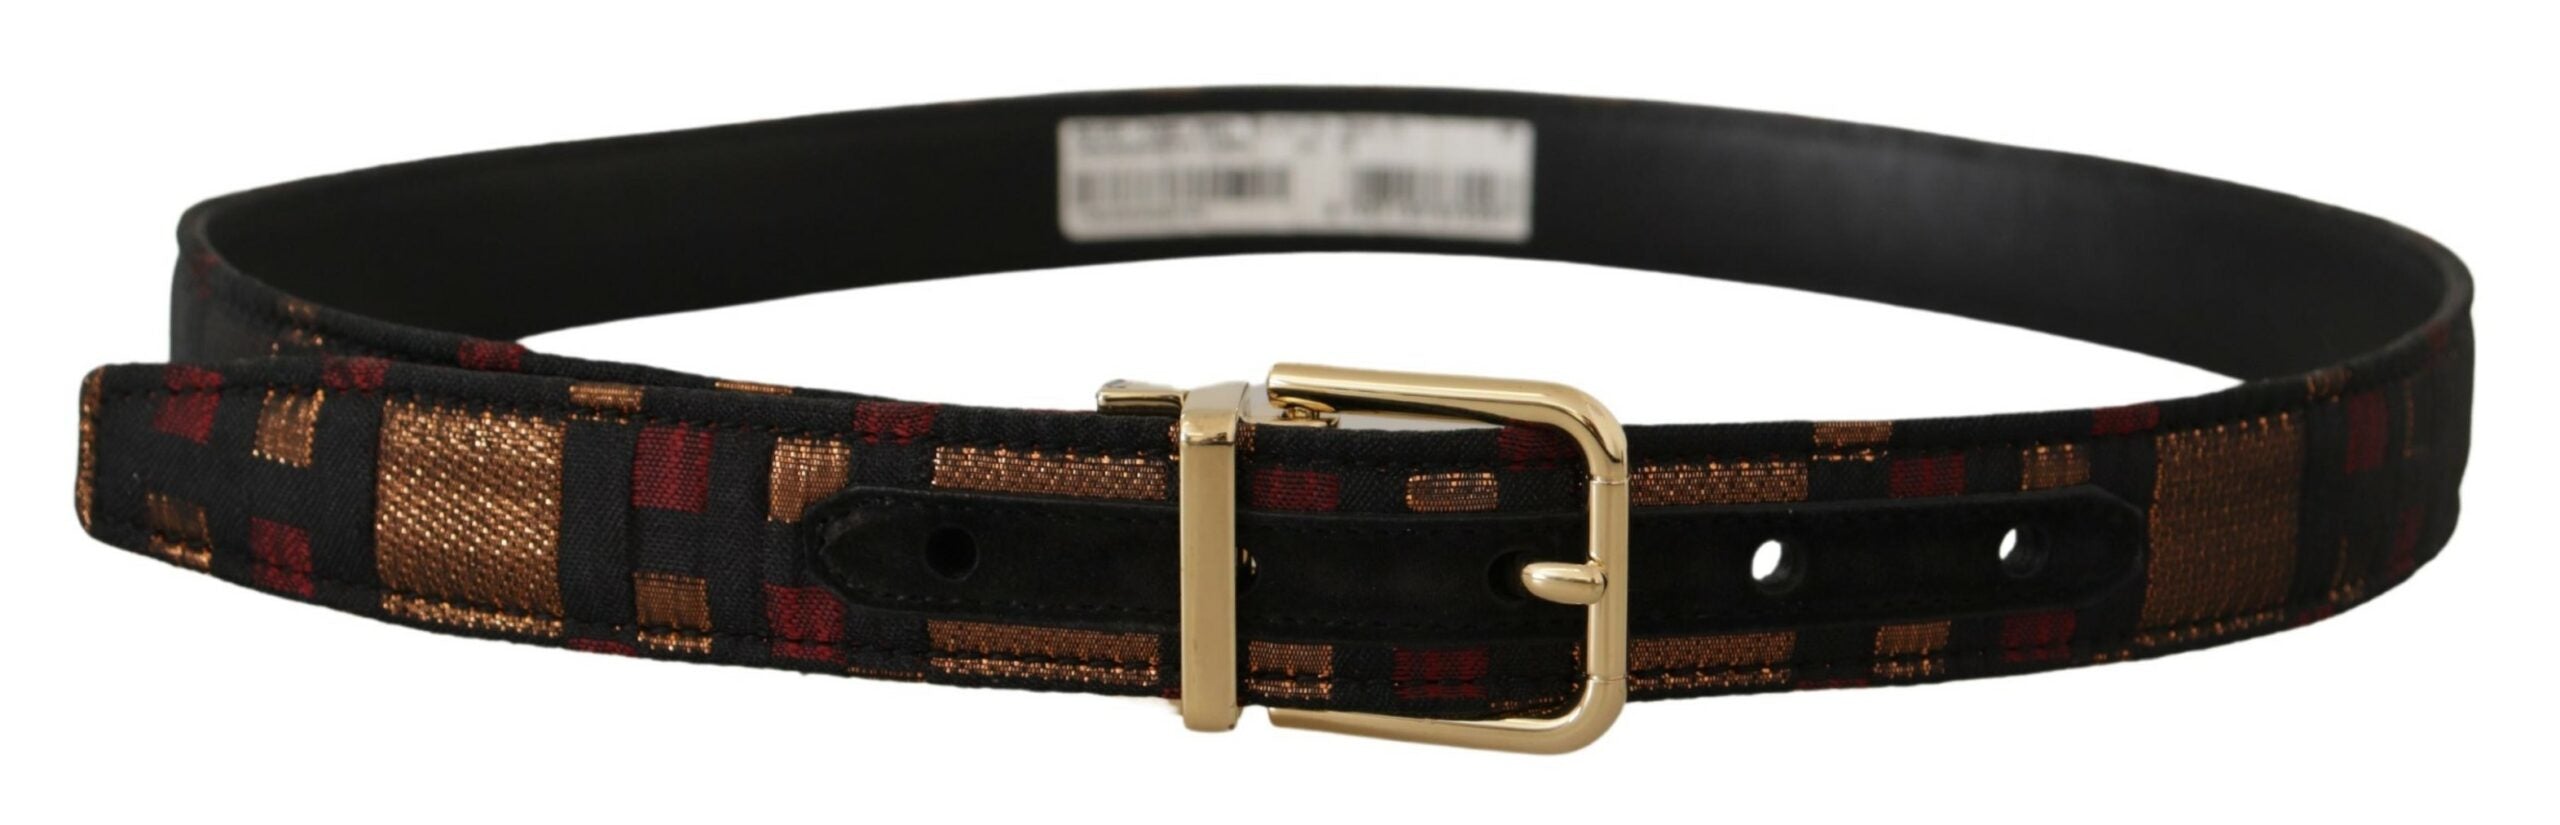 Dolce & Gabbana Multicolor Leather Belt with Gold Buckle